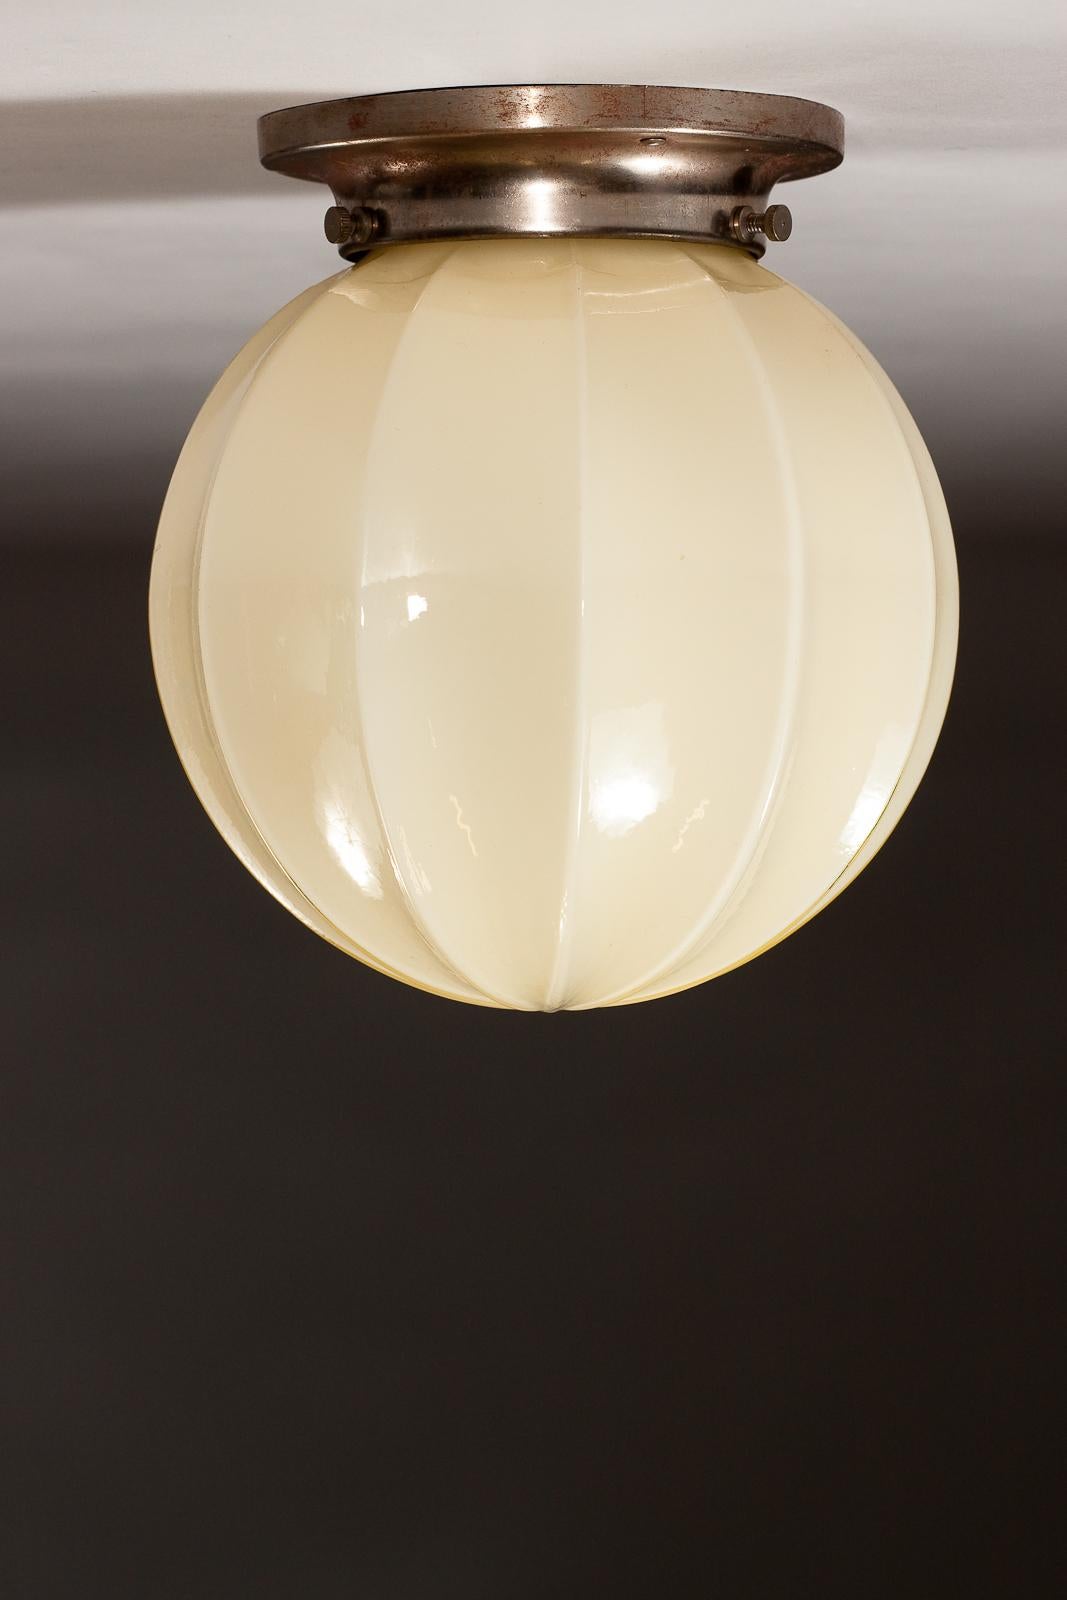 Add a touch of vintage glam to your space with this stunning 1930's opaline glass plafond lamp by Idman Oy. Crafted with exquisite attention to detail, this opulent fixture features a beautifully ribbed opaline glass shade that diffuses a soft, warm